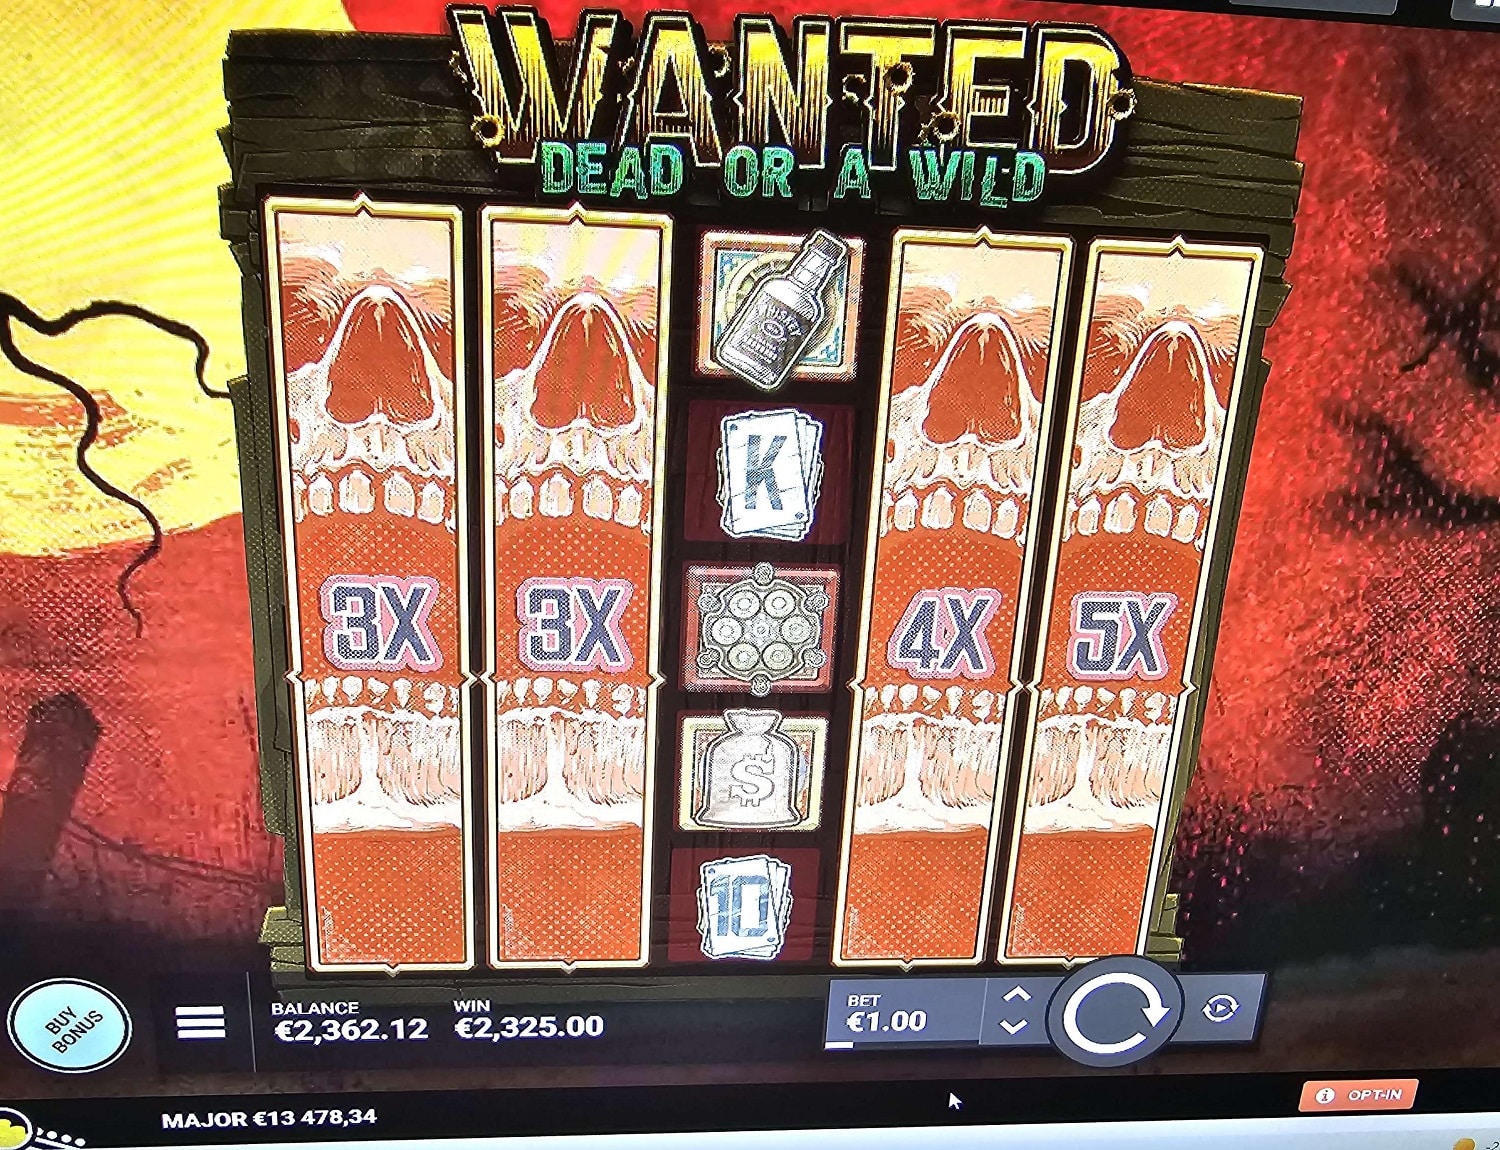 Wanted Dead Or a Wild Casino win picture by holari993 2325€ 2325x 1.4.2023 Leovegas